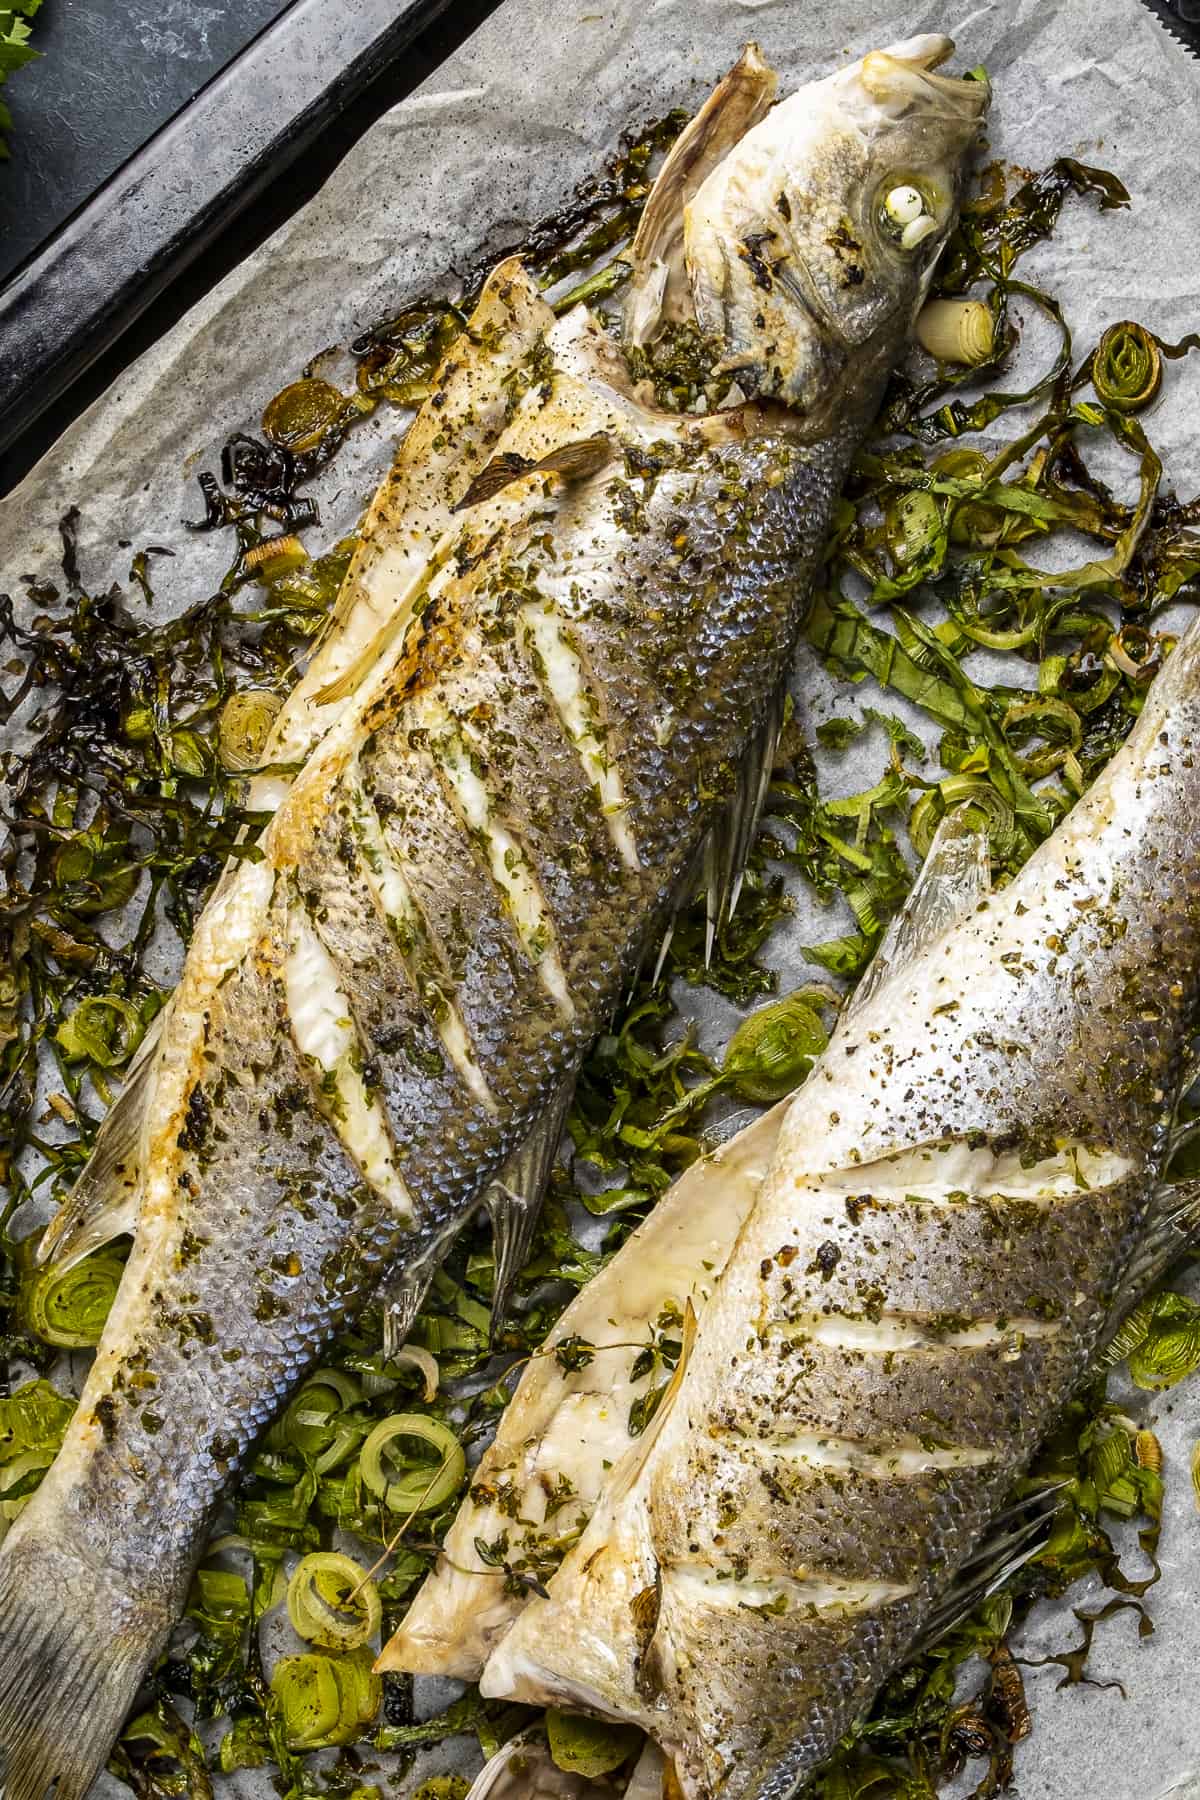 Two baked whole fish on roasted green vegetables in a baking pan.